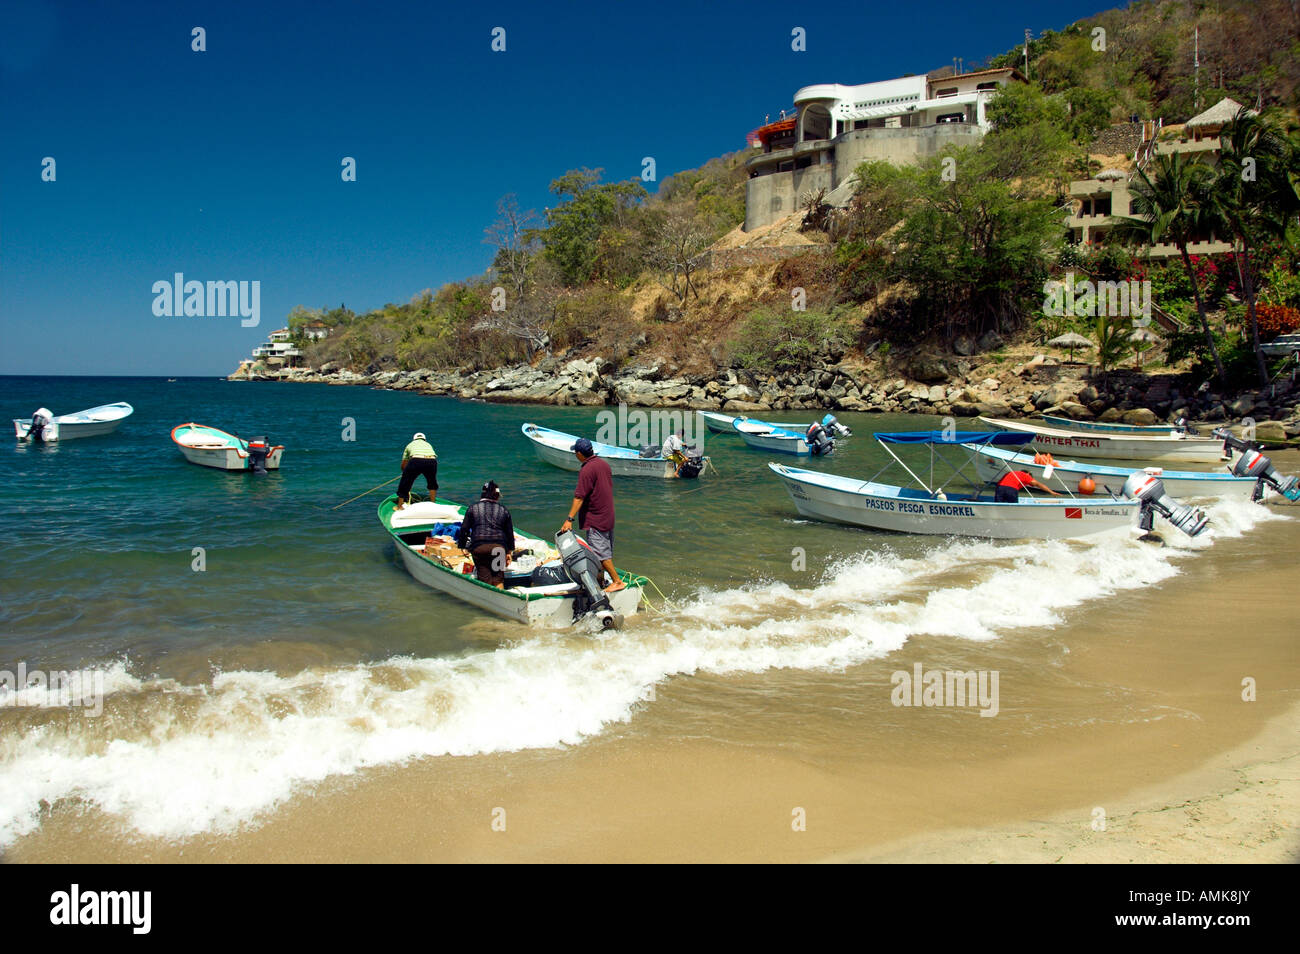 A small sandy beach cove with colorful boats on Banderas Bay south of Puerto Vallarta Mexico Stock Photo